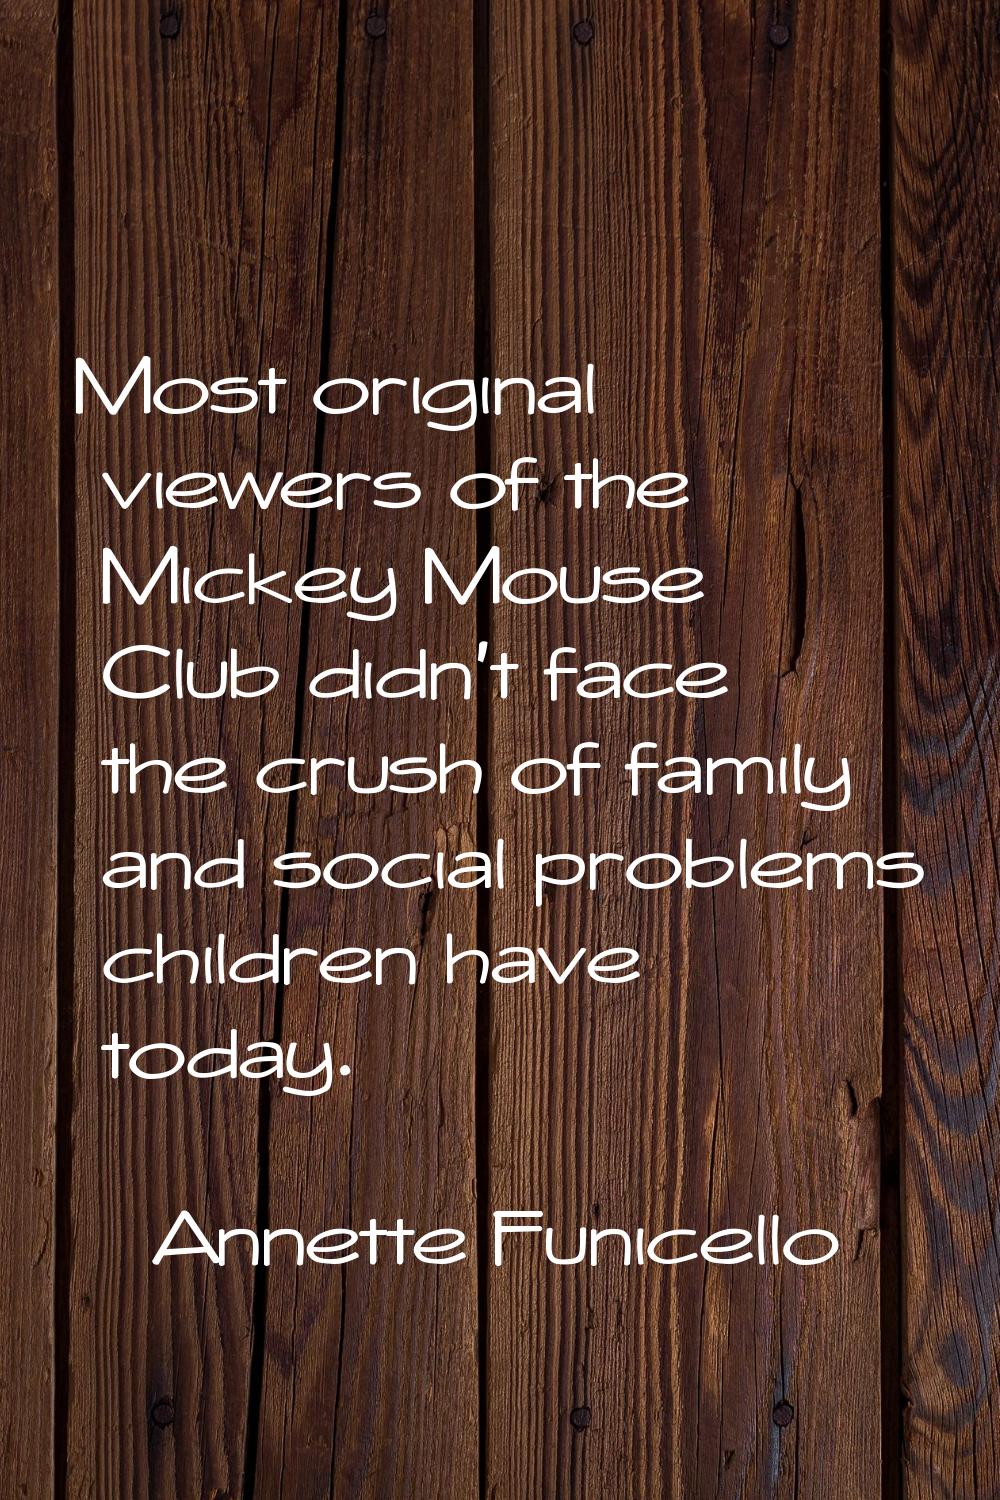 Most original viewers of the Mickey Mouse Club didn't face the crush of family and social problems 